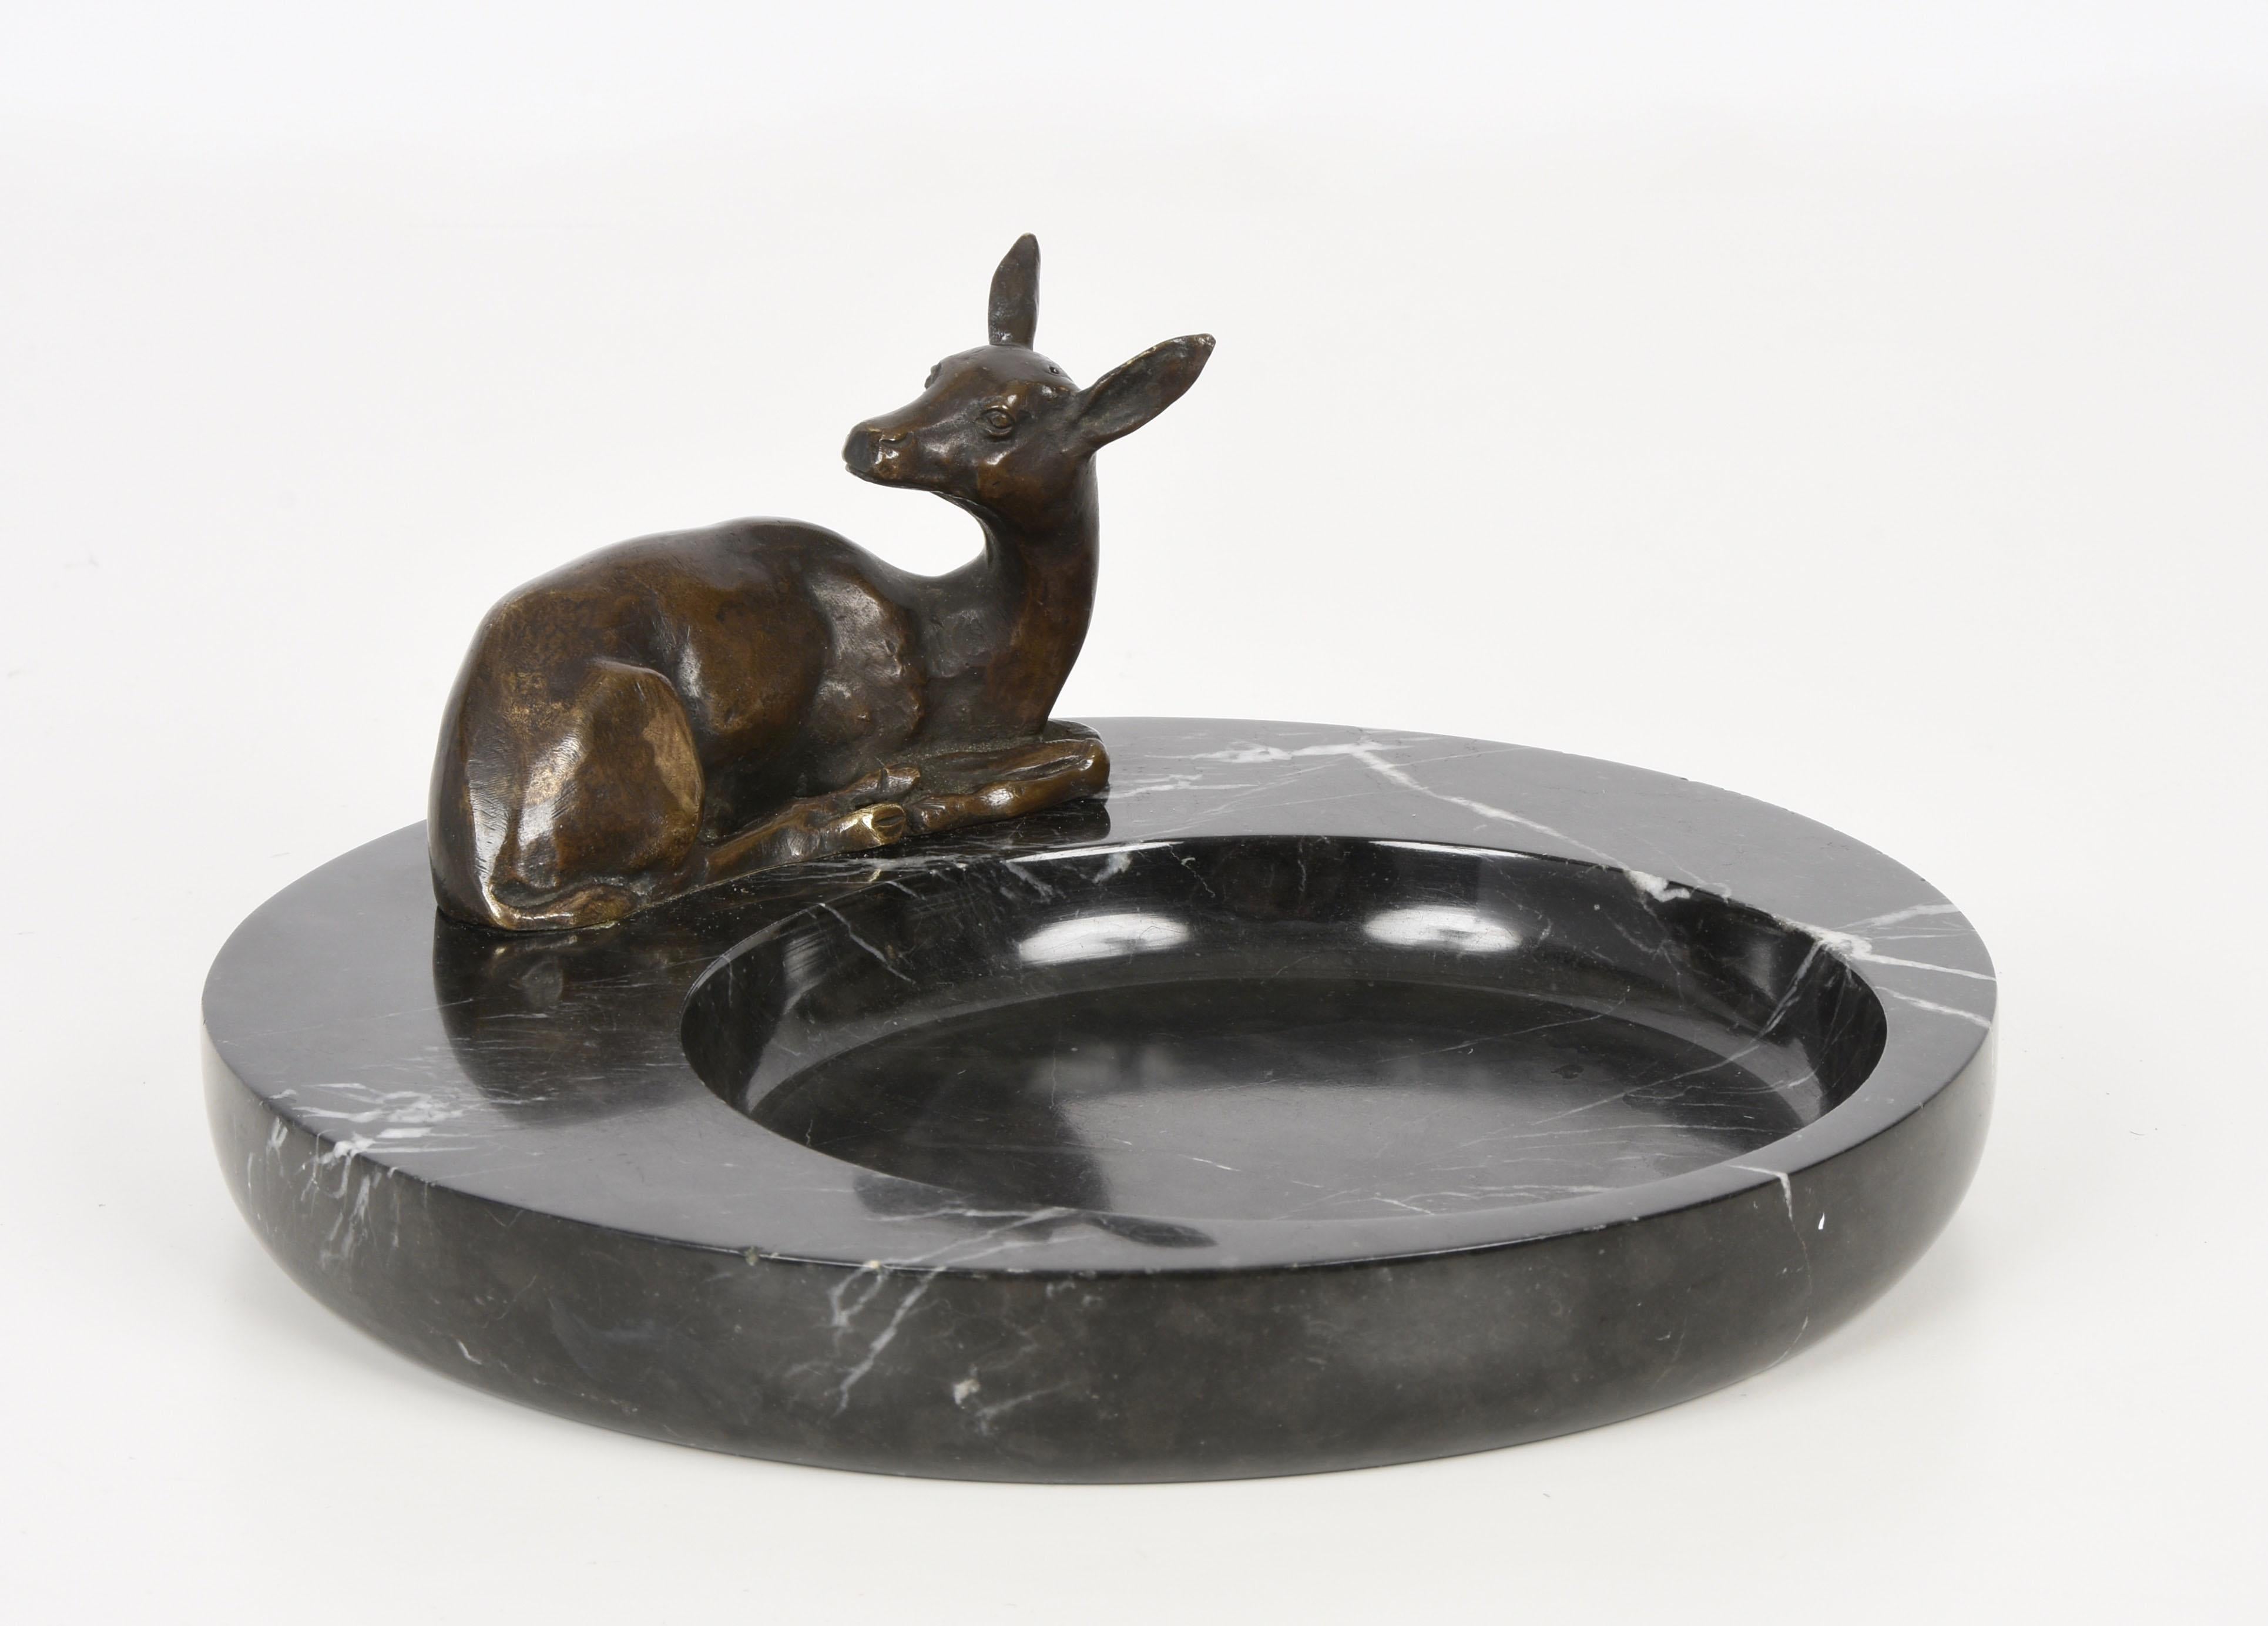 European Midcentury Bronze and Black Marble Italian Ashtray with Deer Sculpture, 1930s